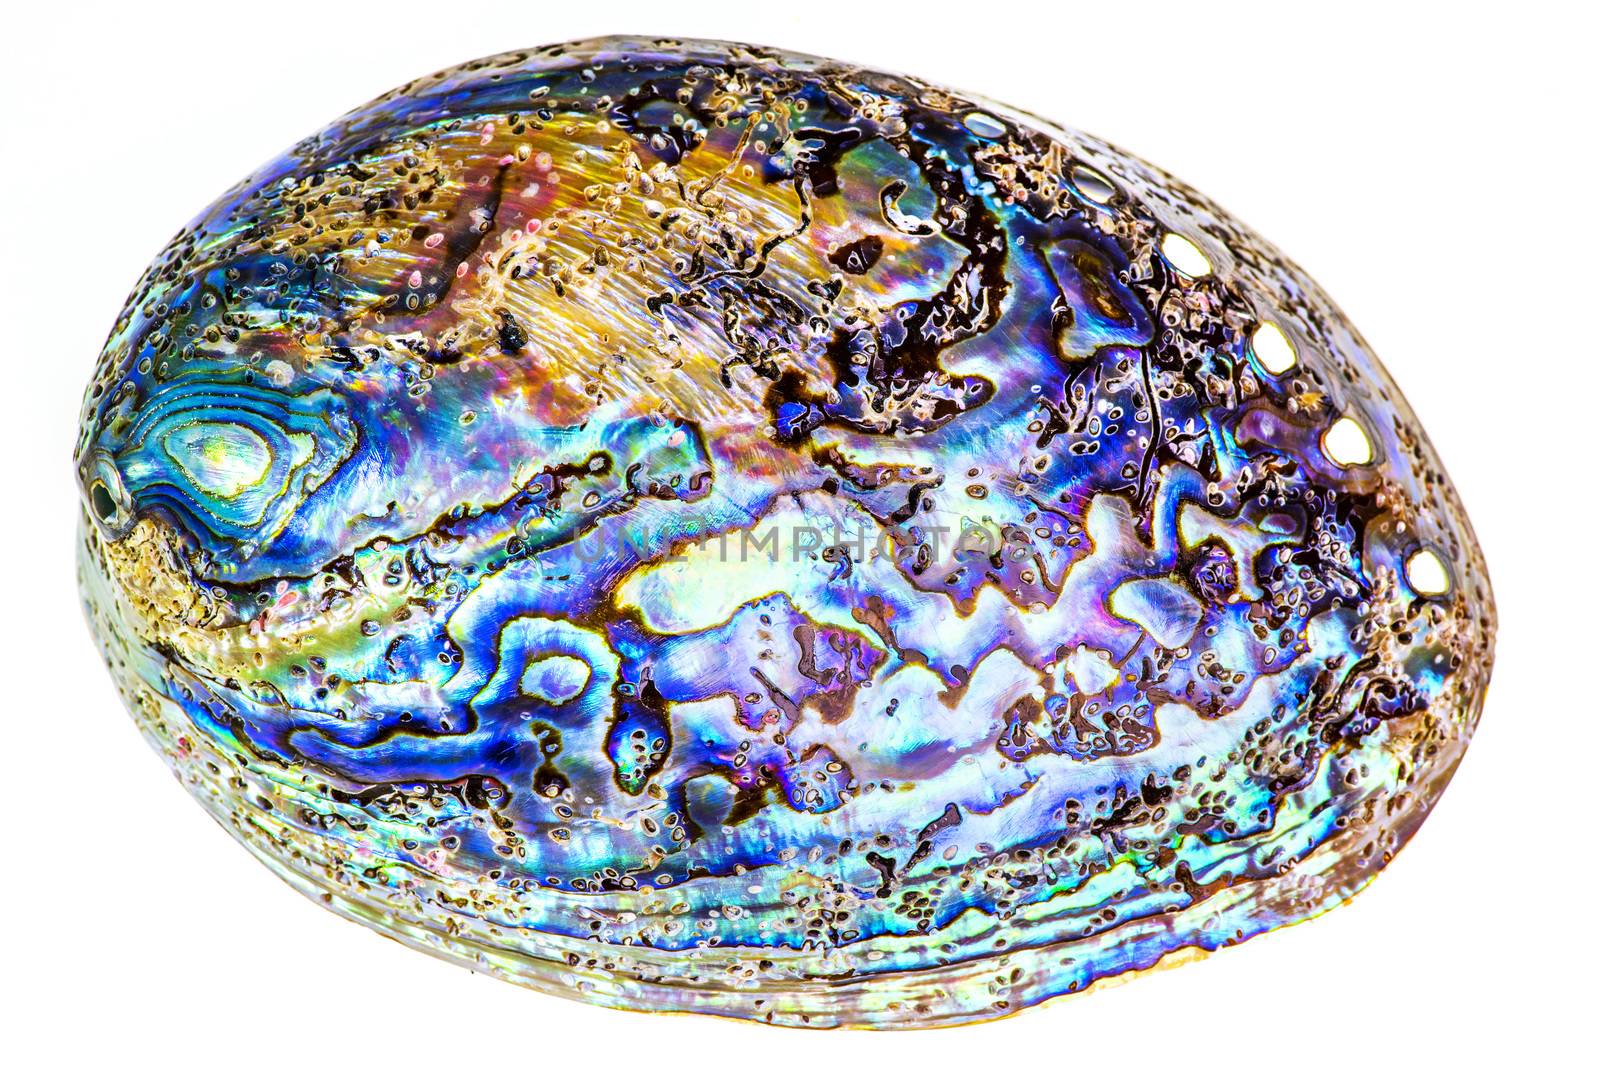 Polished paua abalone shell on white by fyletto